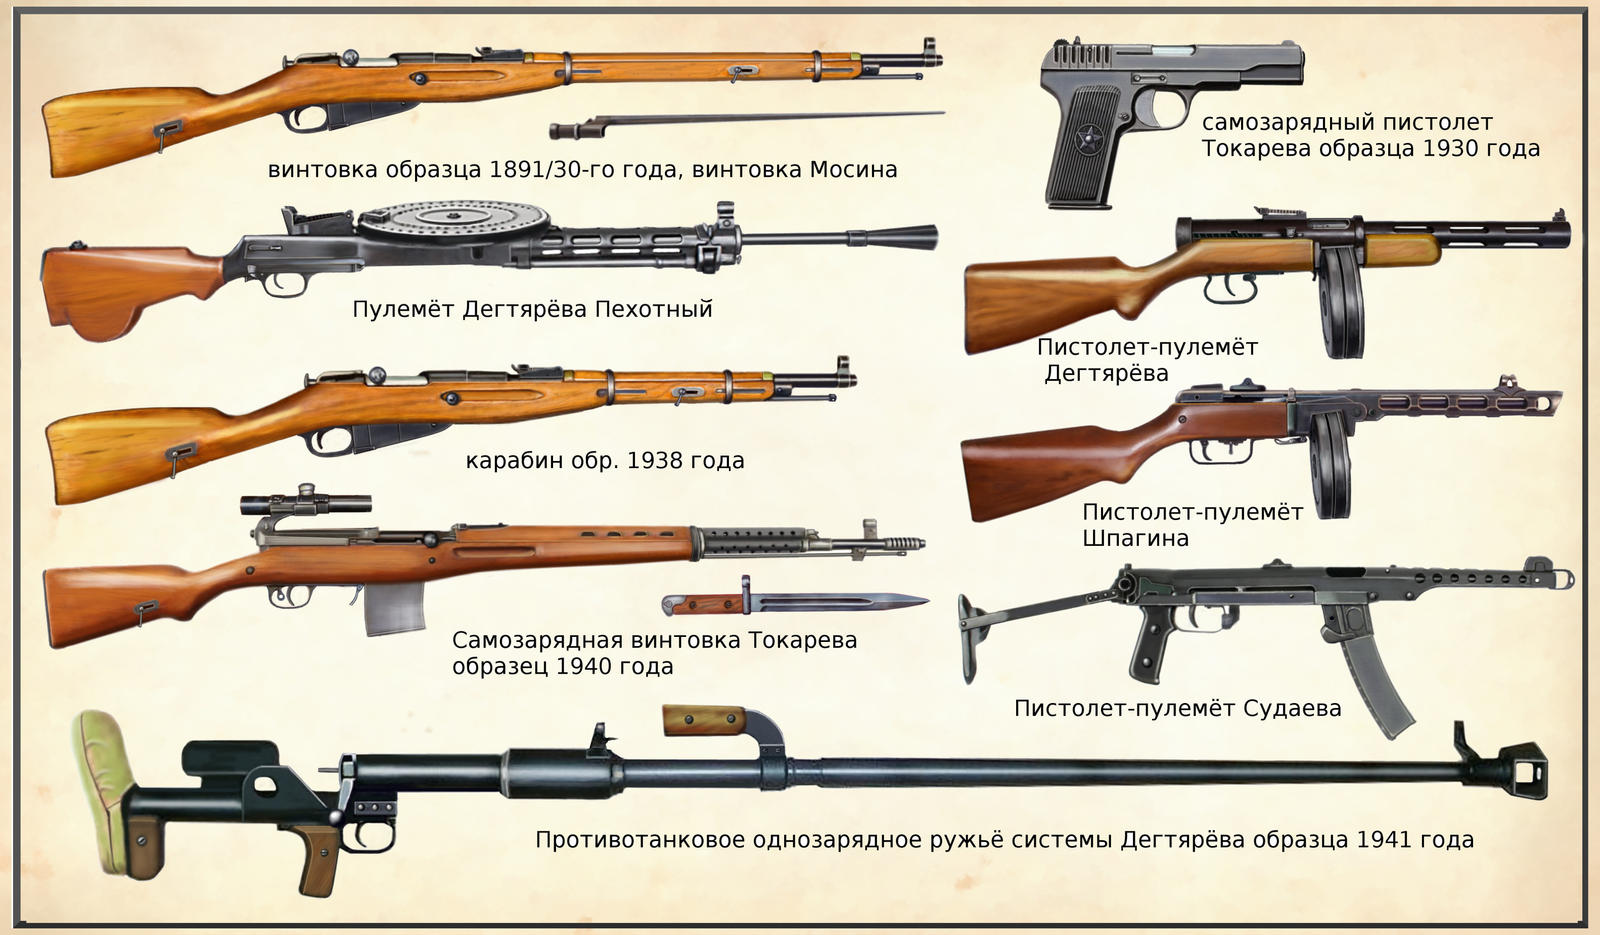 WW2 Soviet Union infantry weapons by AndreaSilva60 on 